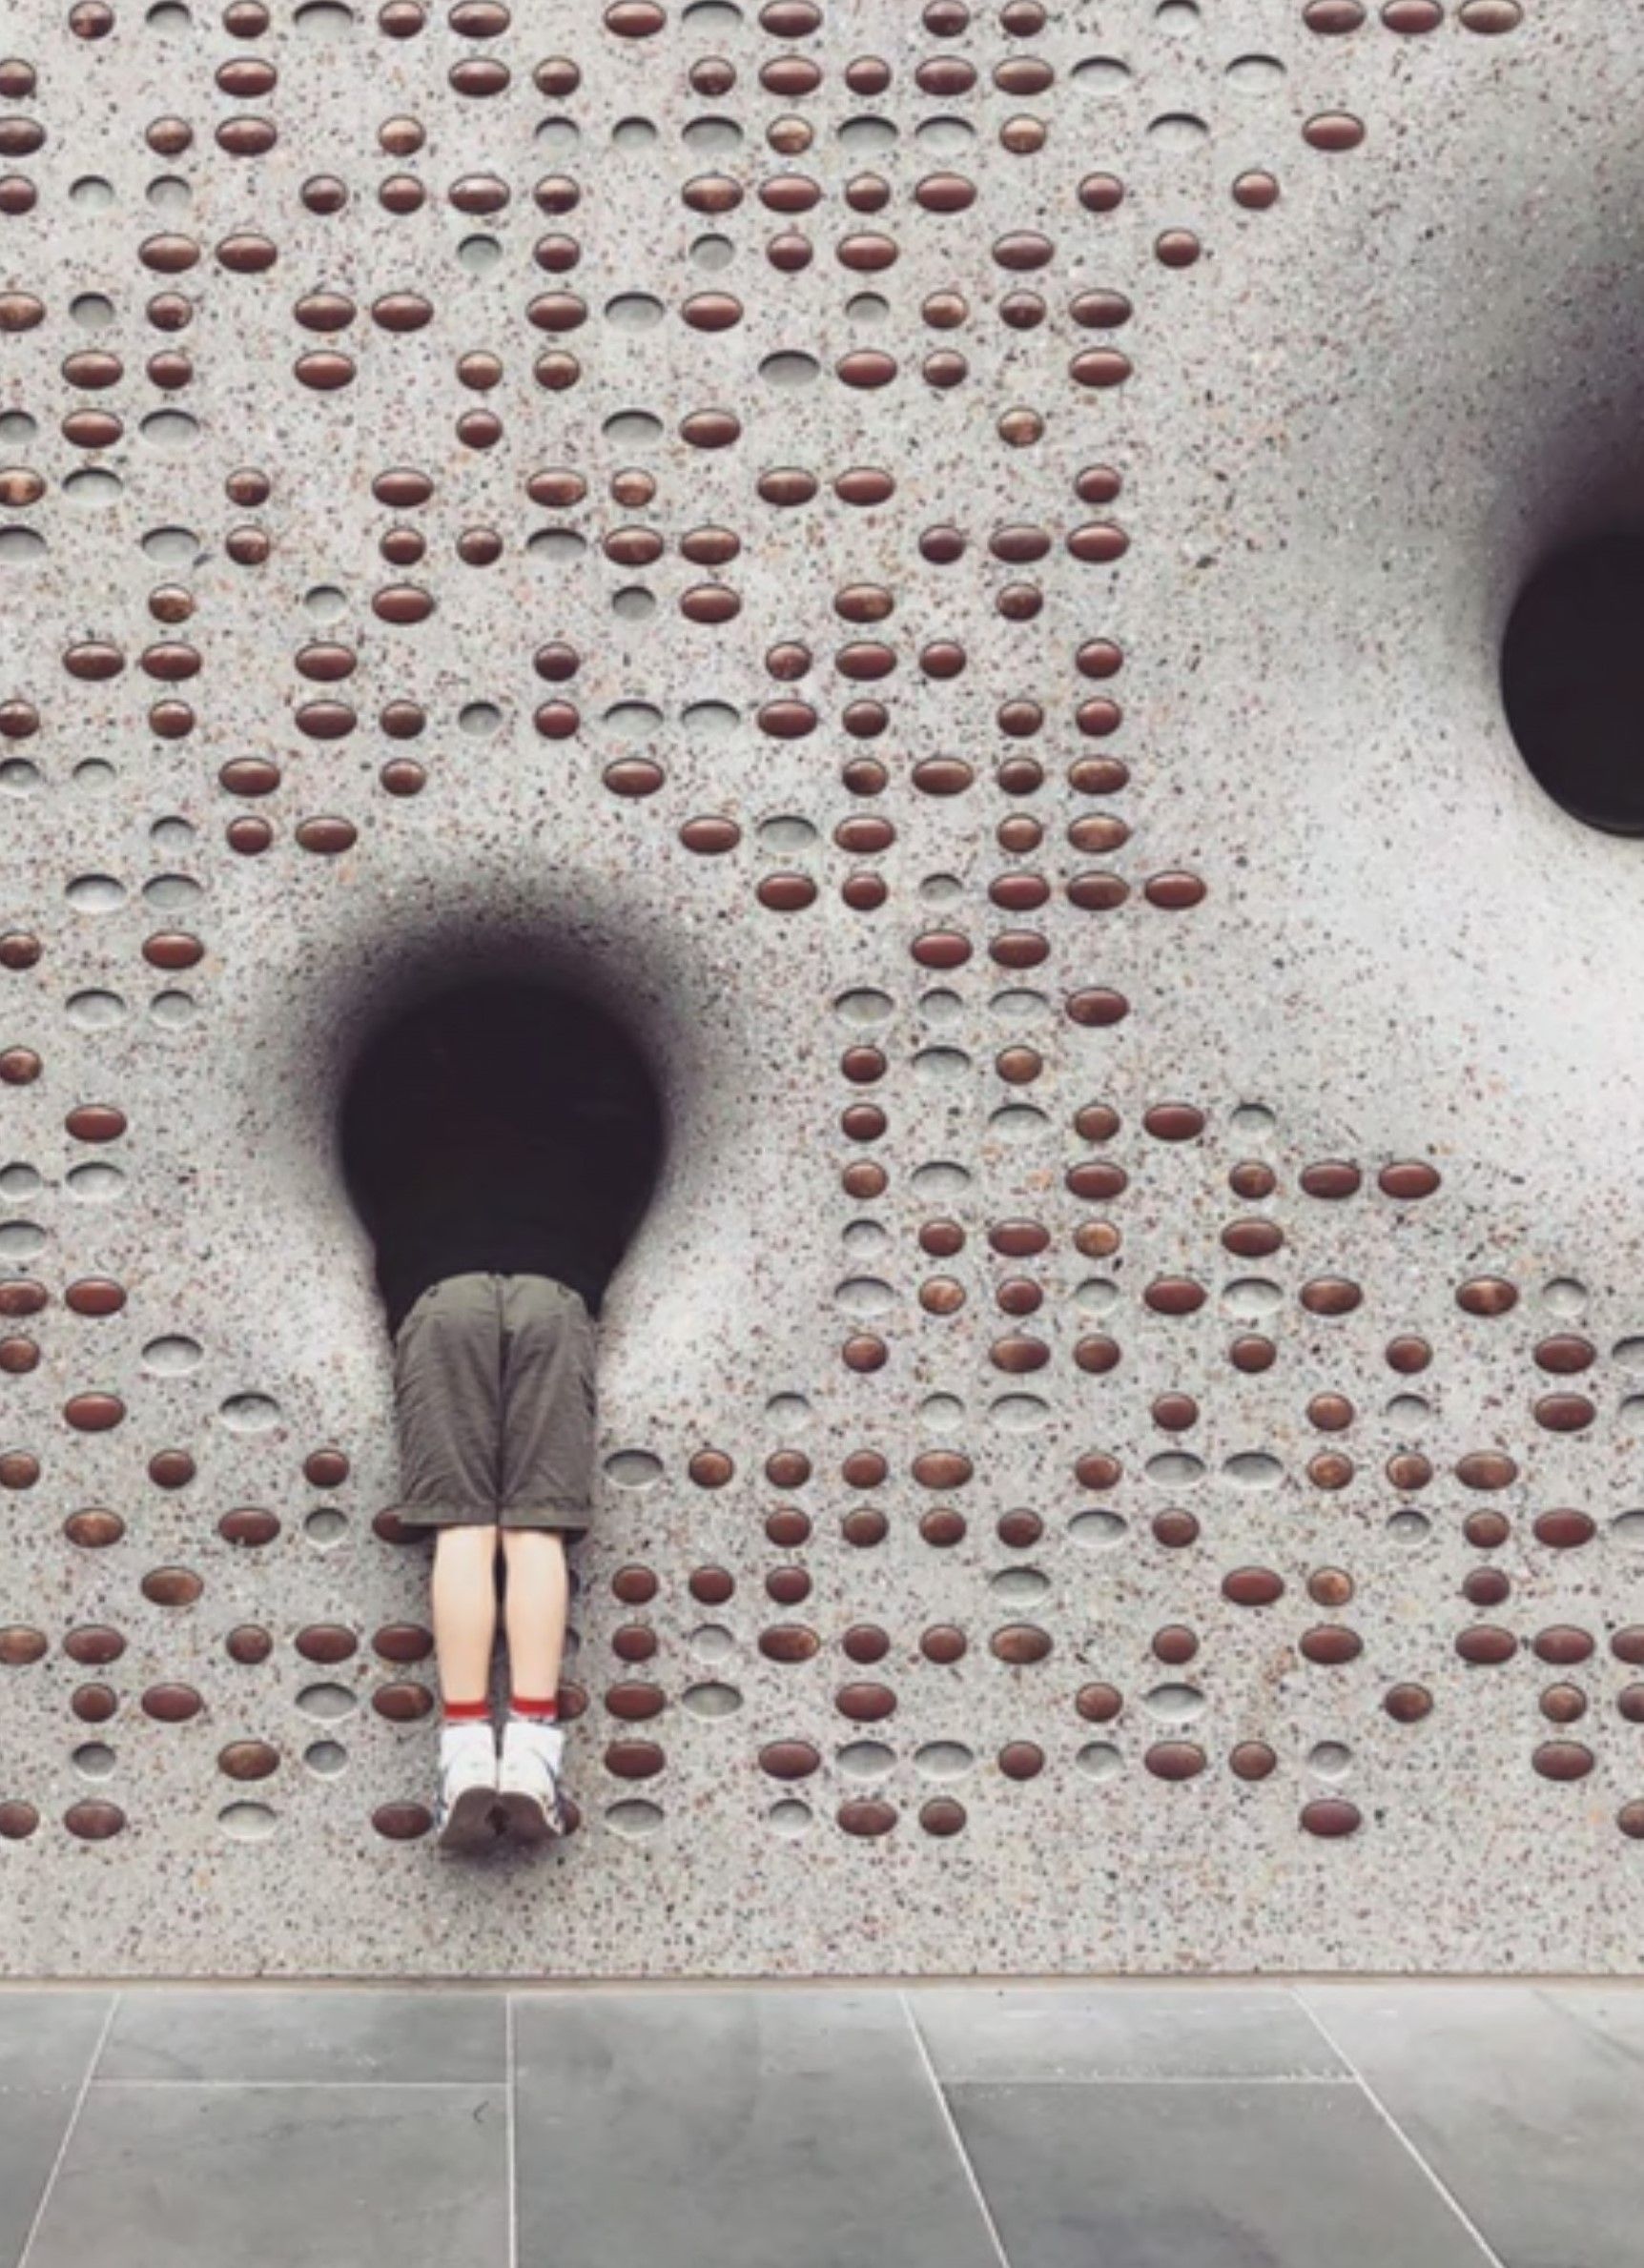 A grey concrete building wall with small tactile dots and large hollow circles with a child's playing in one circle by leaning through with its legs hanging out.